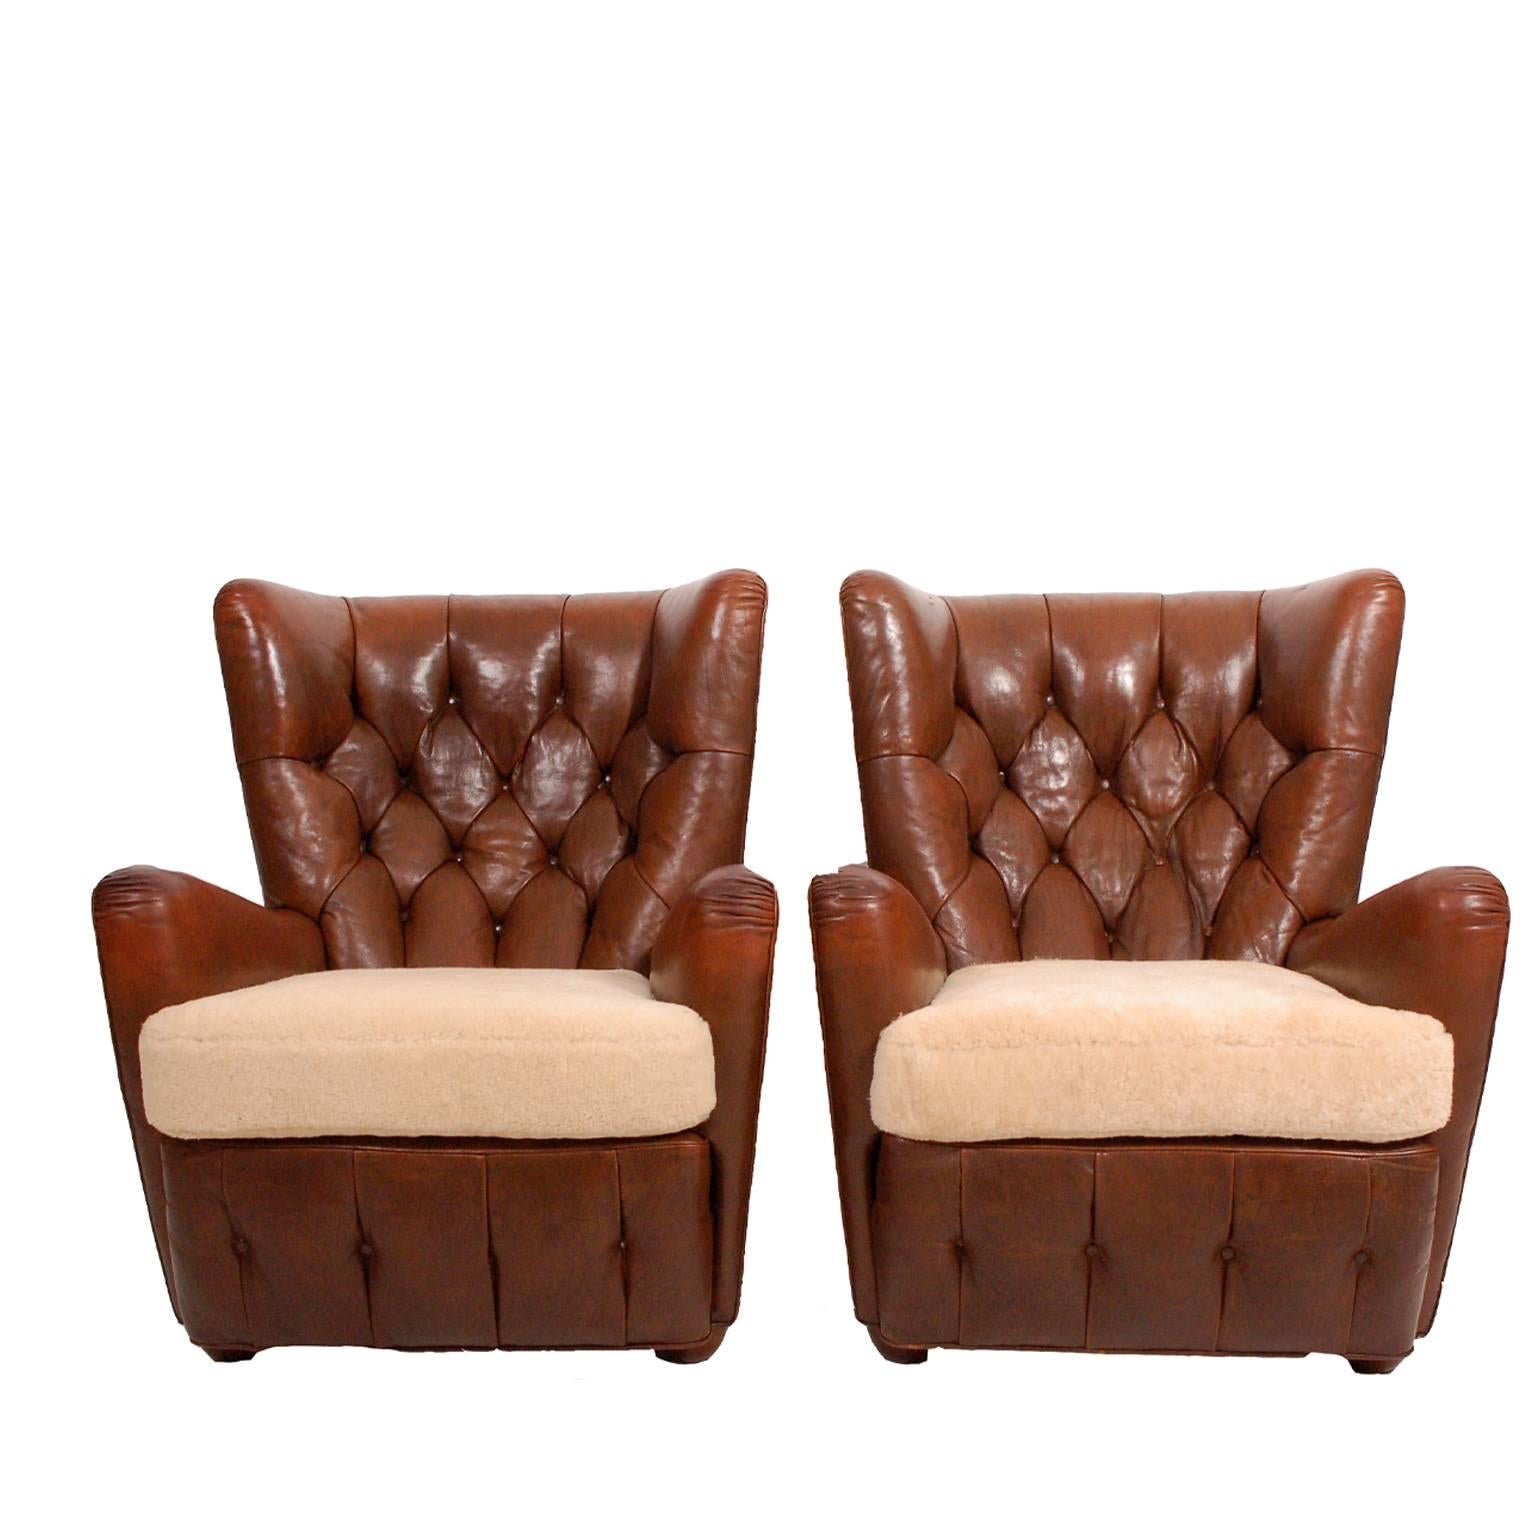 1930s Chesterfield style high back leather easy chairs with button back and base, sheepskin seats and original brown leather. Brass nailhead trim to both. Sitting on beechwood feet. Sold as a pair only.